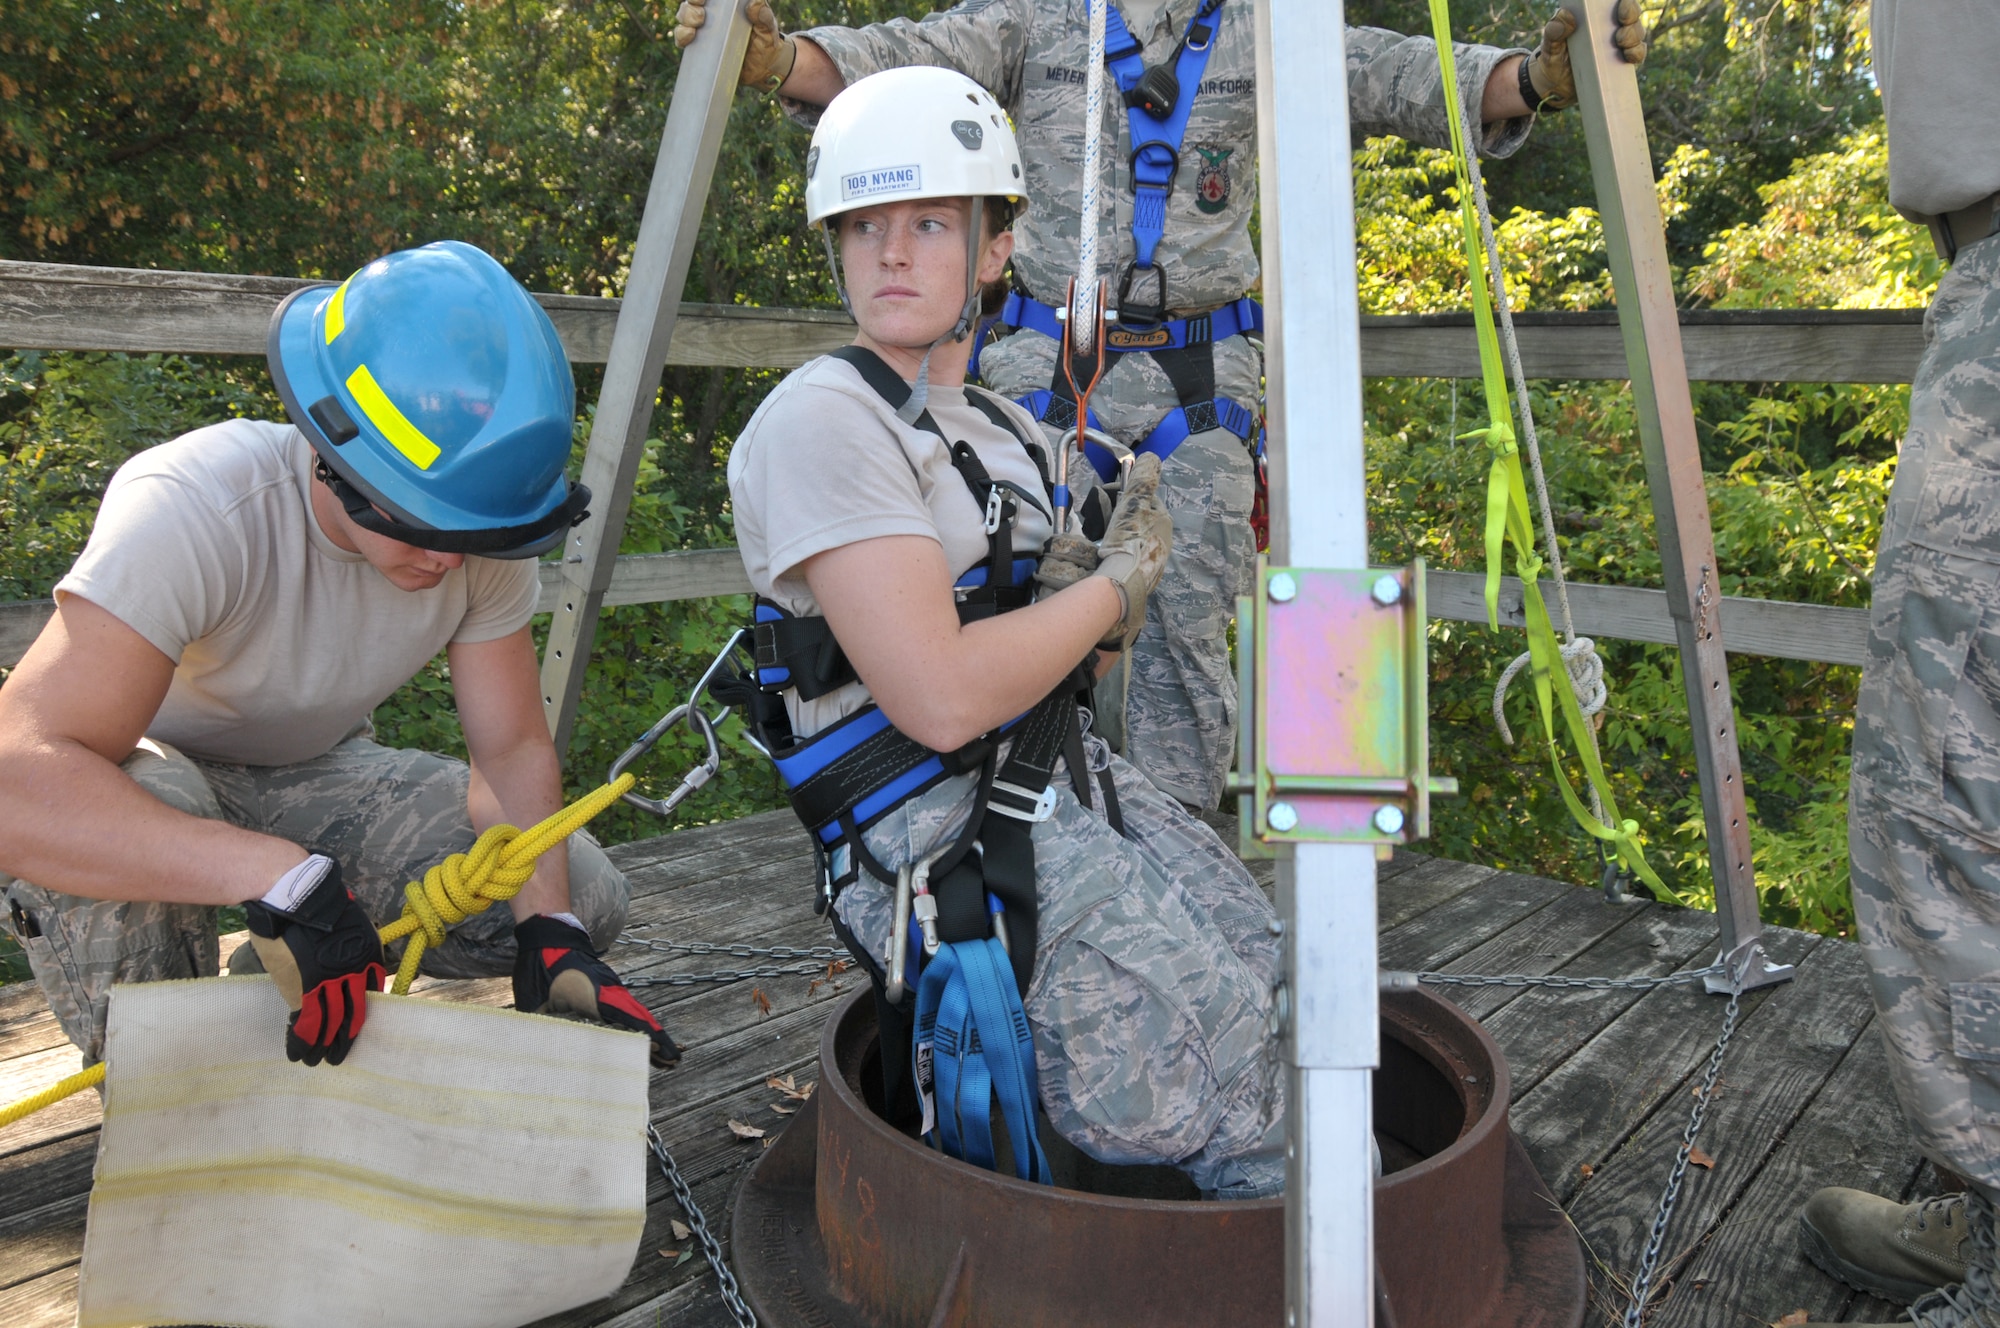 The 109th Fire Department's search and rescue team prepare to lower Staff Sgt. Jennifer Bristol during confined space training for the team at Stratton Air National Guard Base, New York, on Sept. 17, 2015. The 12-person search and rescue team trains monthly on various rescue techniques. (U.S. Air National Guard photo by Tech. Sgt. Catharine Schmidt/Released)